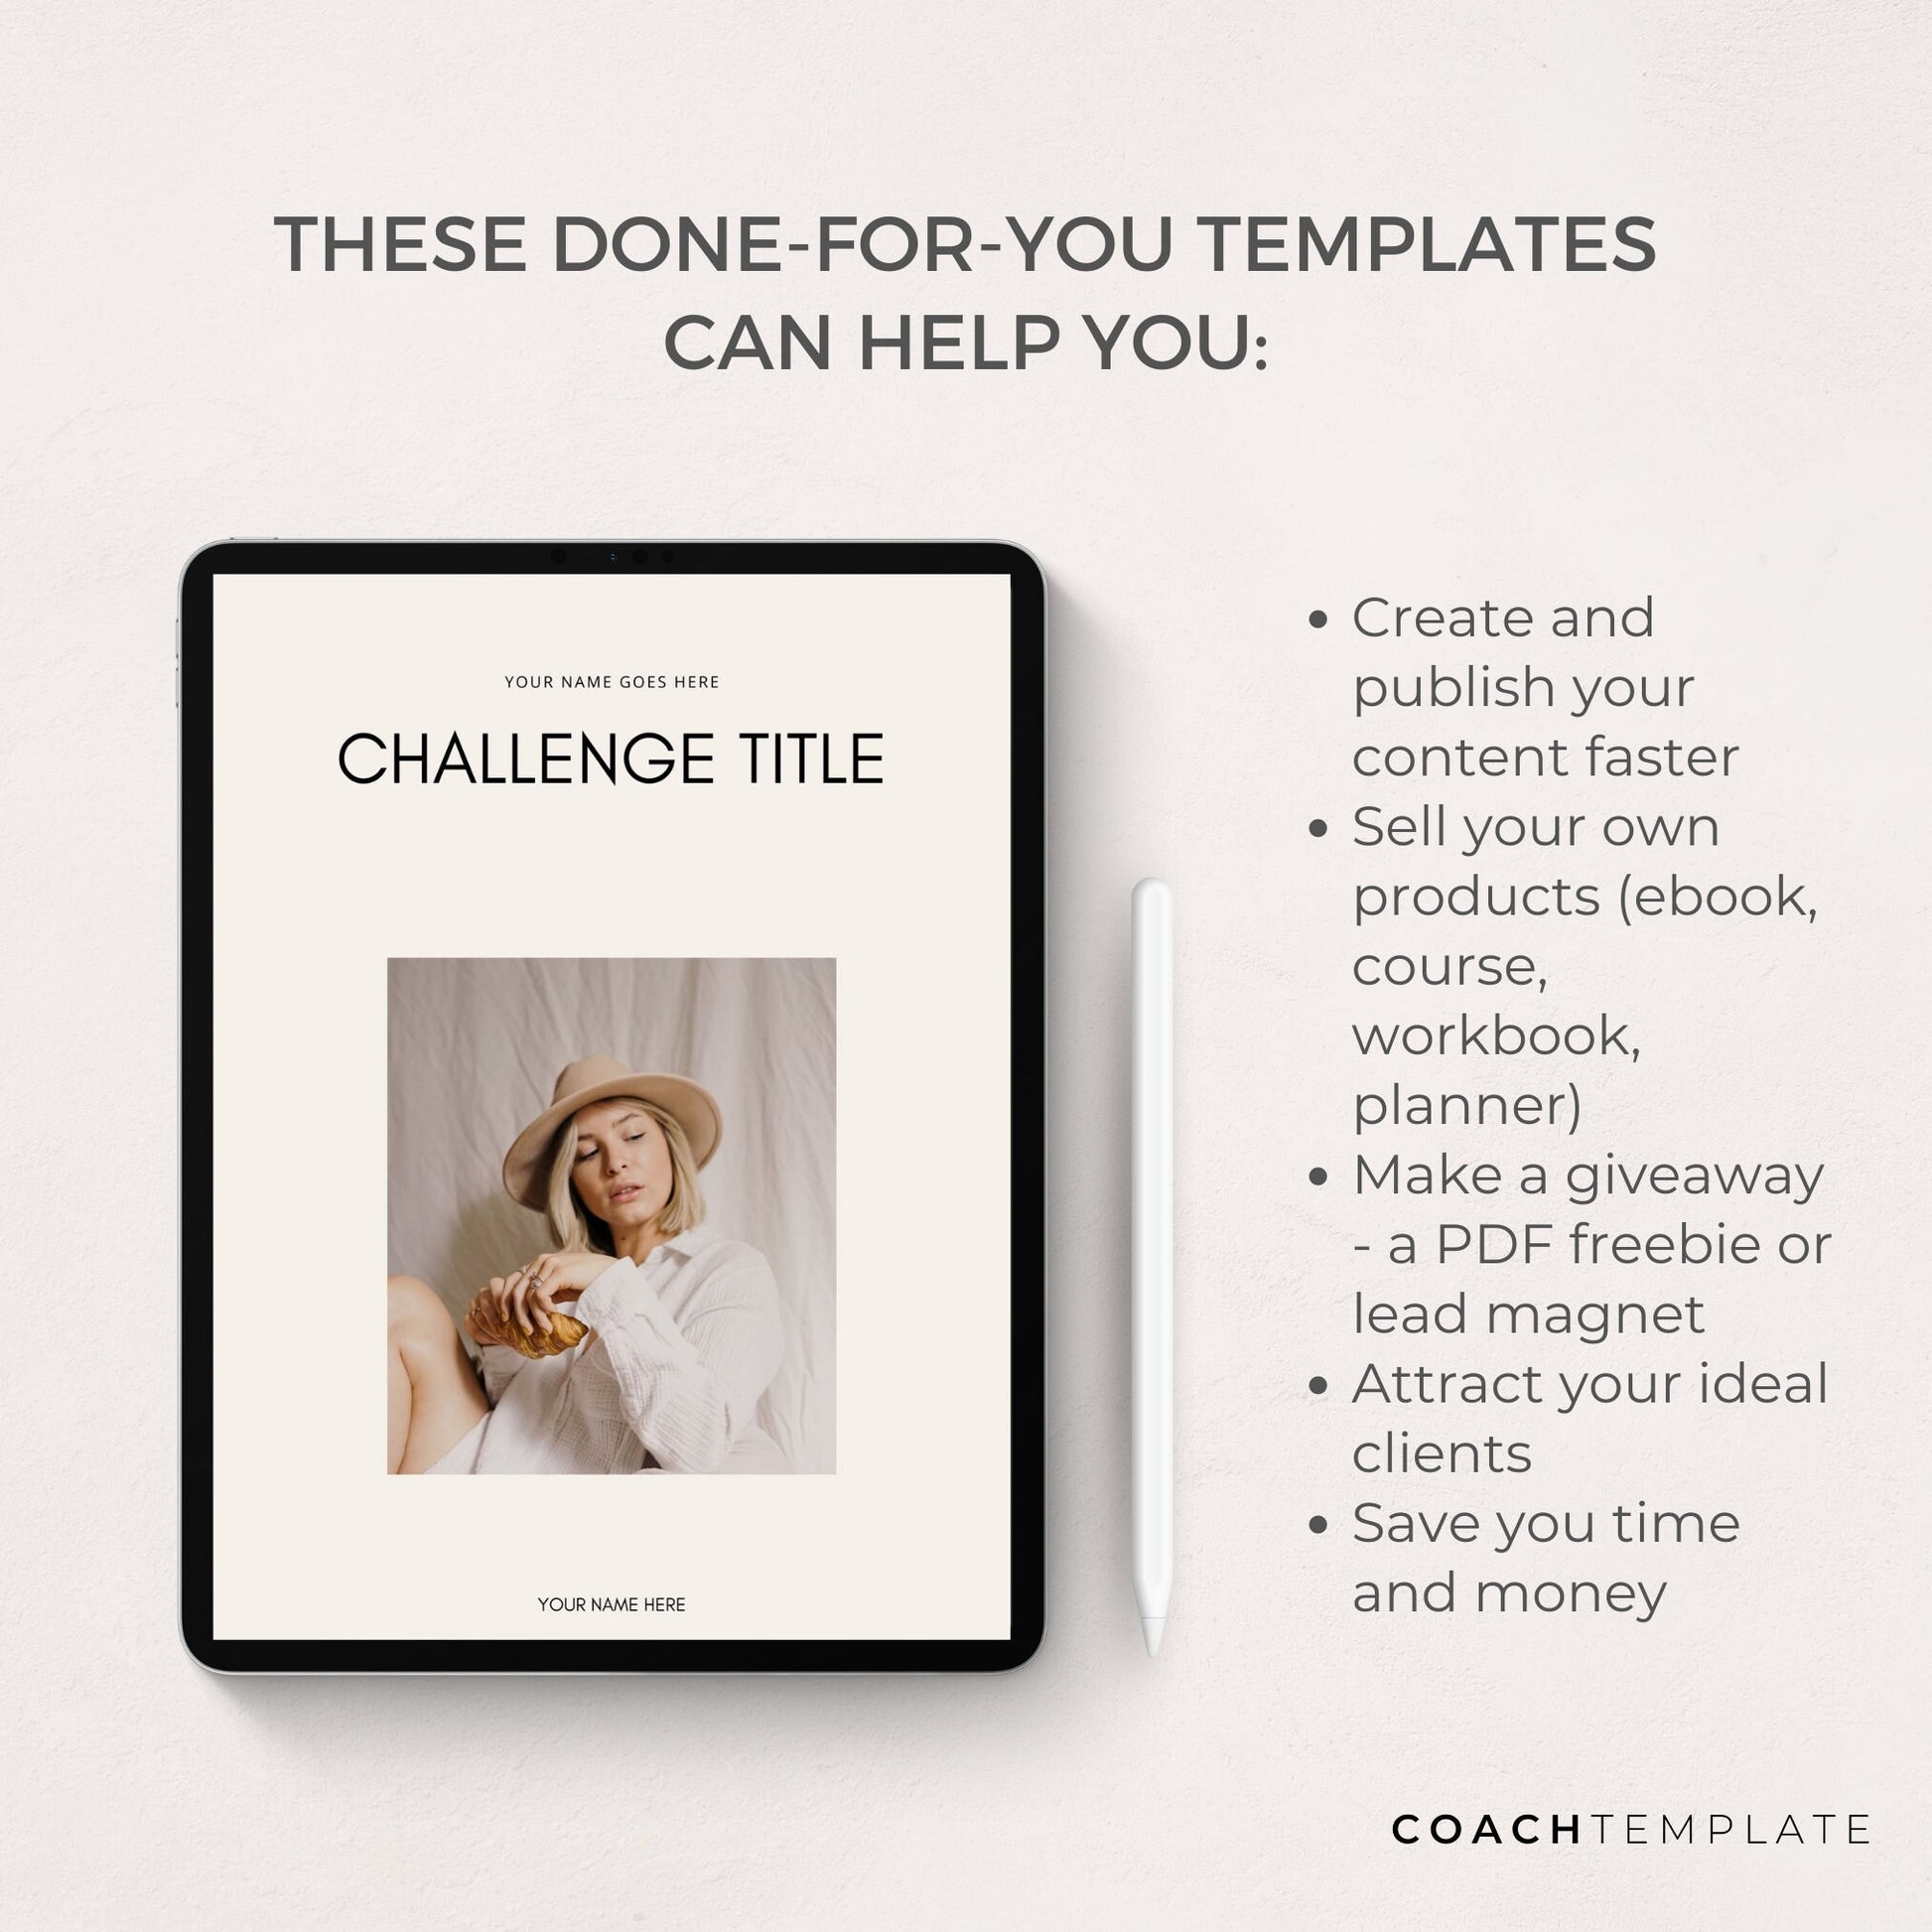 Challenge Worksheet Canva Template | Commercial Use Workbook Lead Magnet for Life Wellness Coach Spiritual business course content creator - CoachTemplate.com 30CTCW

Canva templates to help you create a challenge for your coaching business.